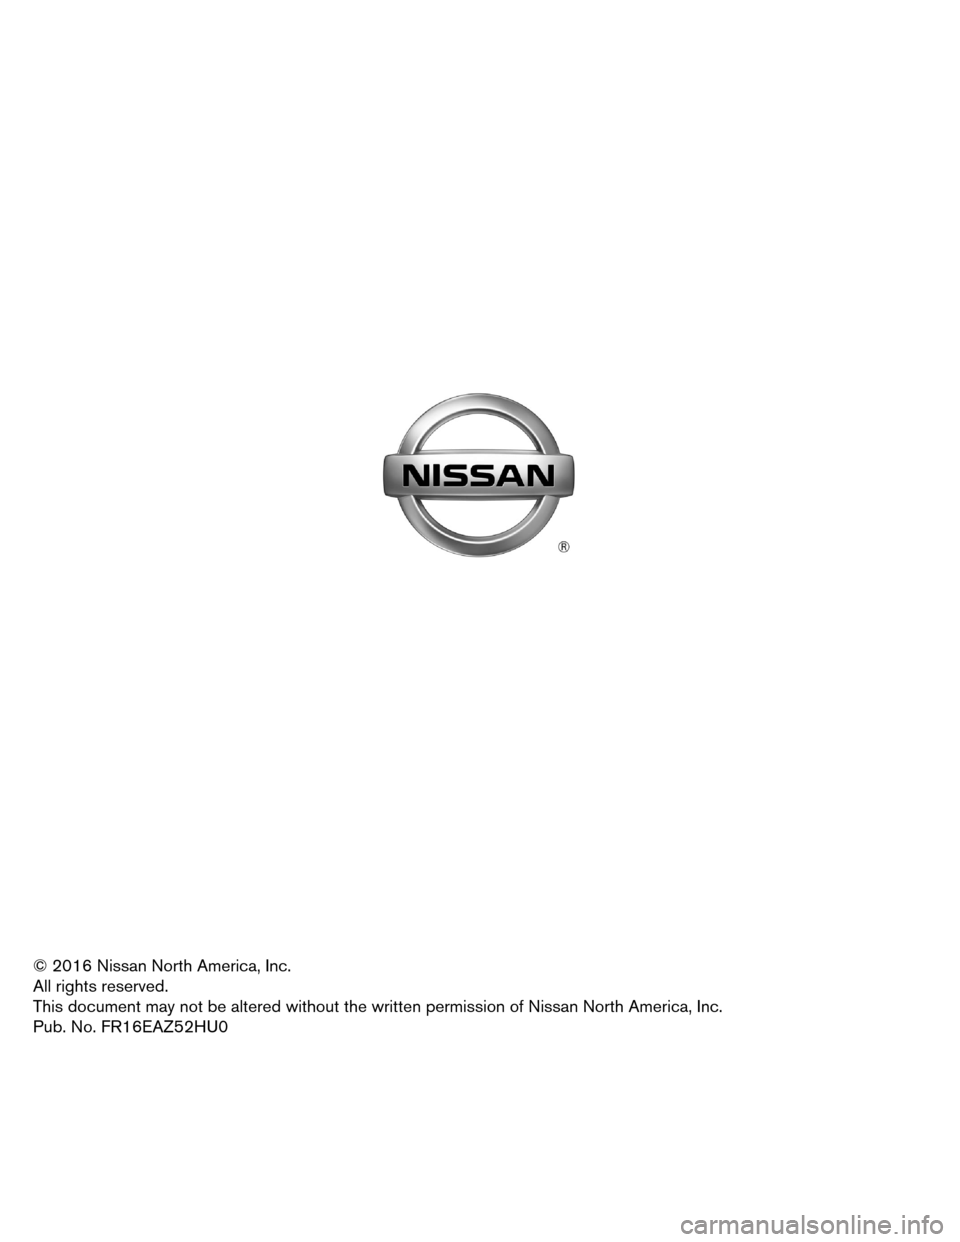 NISSAN MURANO HYBRID 2016 3.G First Responders Guide © 2016 Nissan North America, Inc.
All
rights reserved.
This document may not be altered without the written permission of Nissan North America, Inc.
Pub. No. FR16EAZ52HU0  